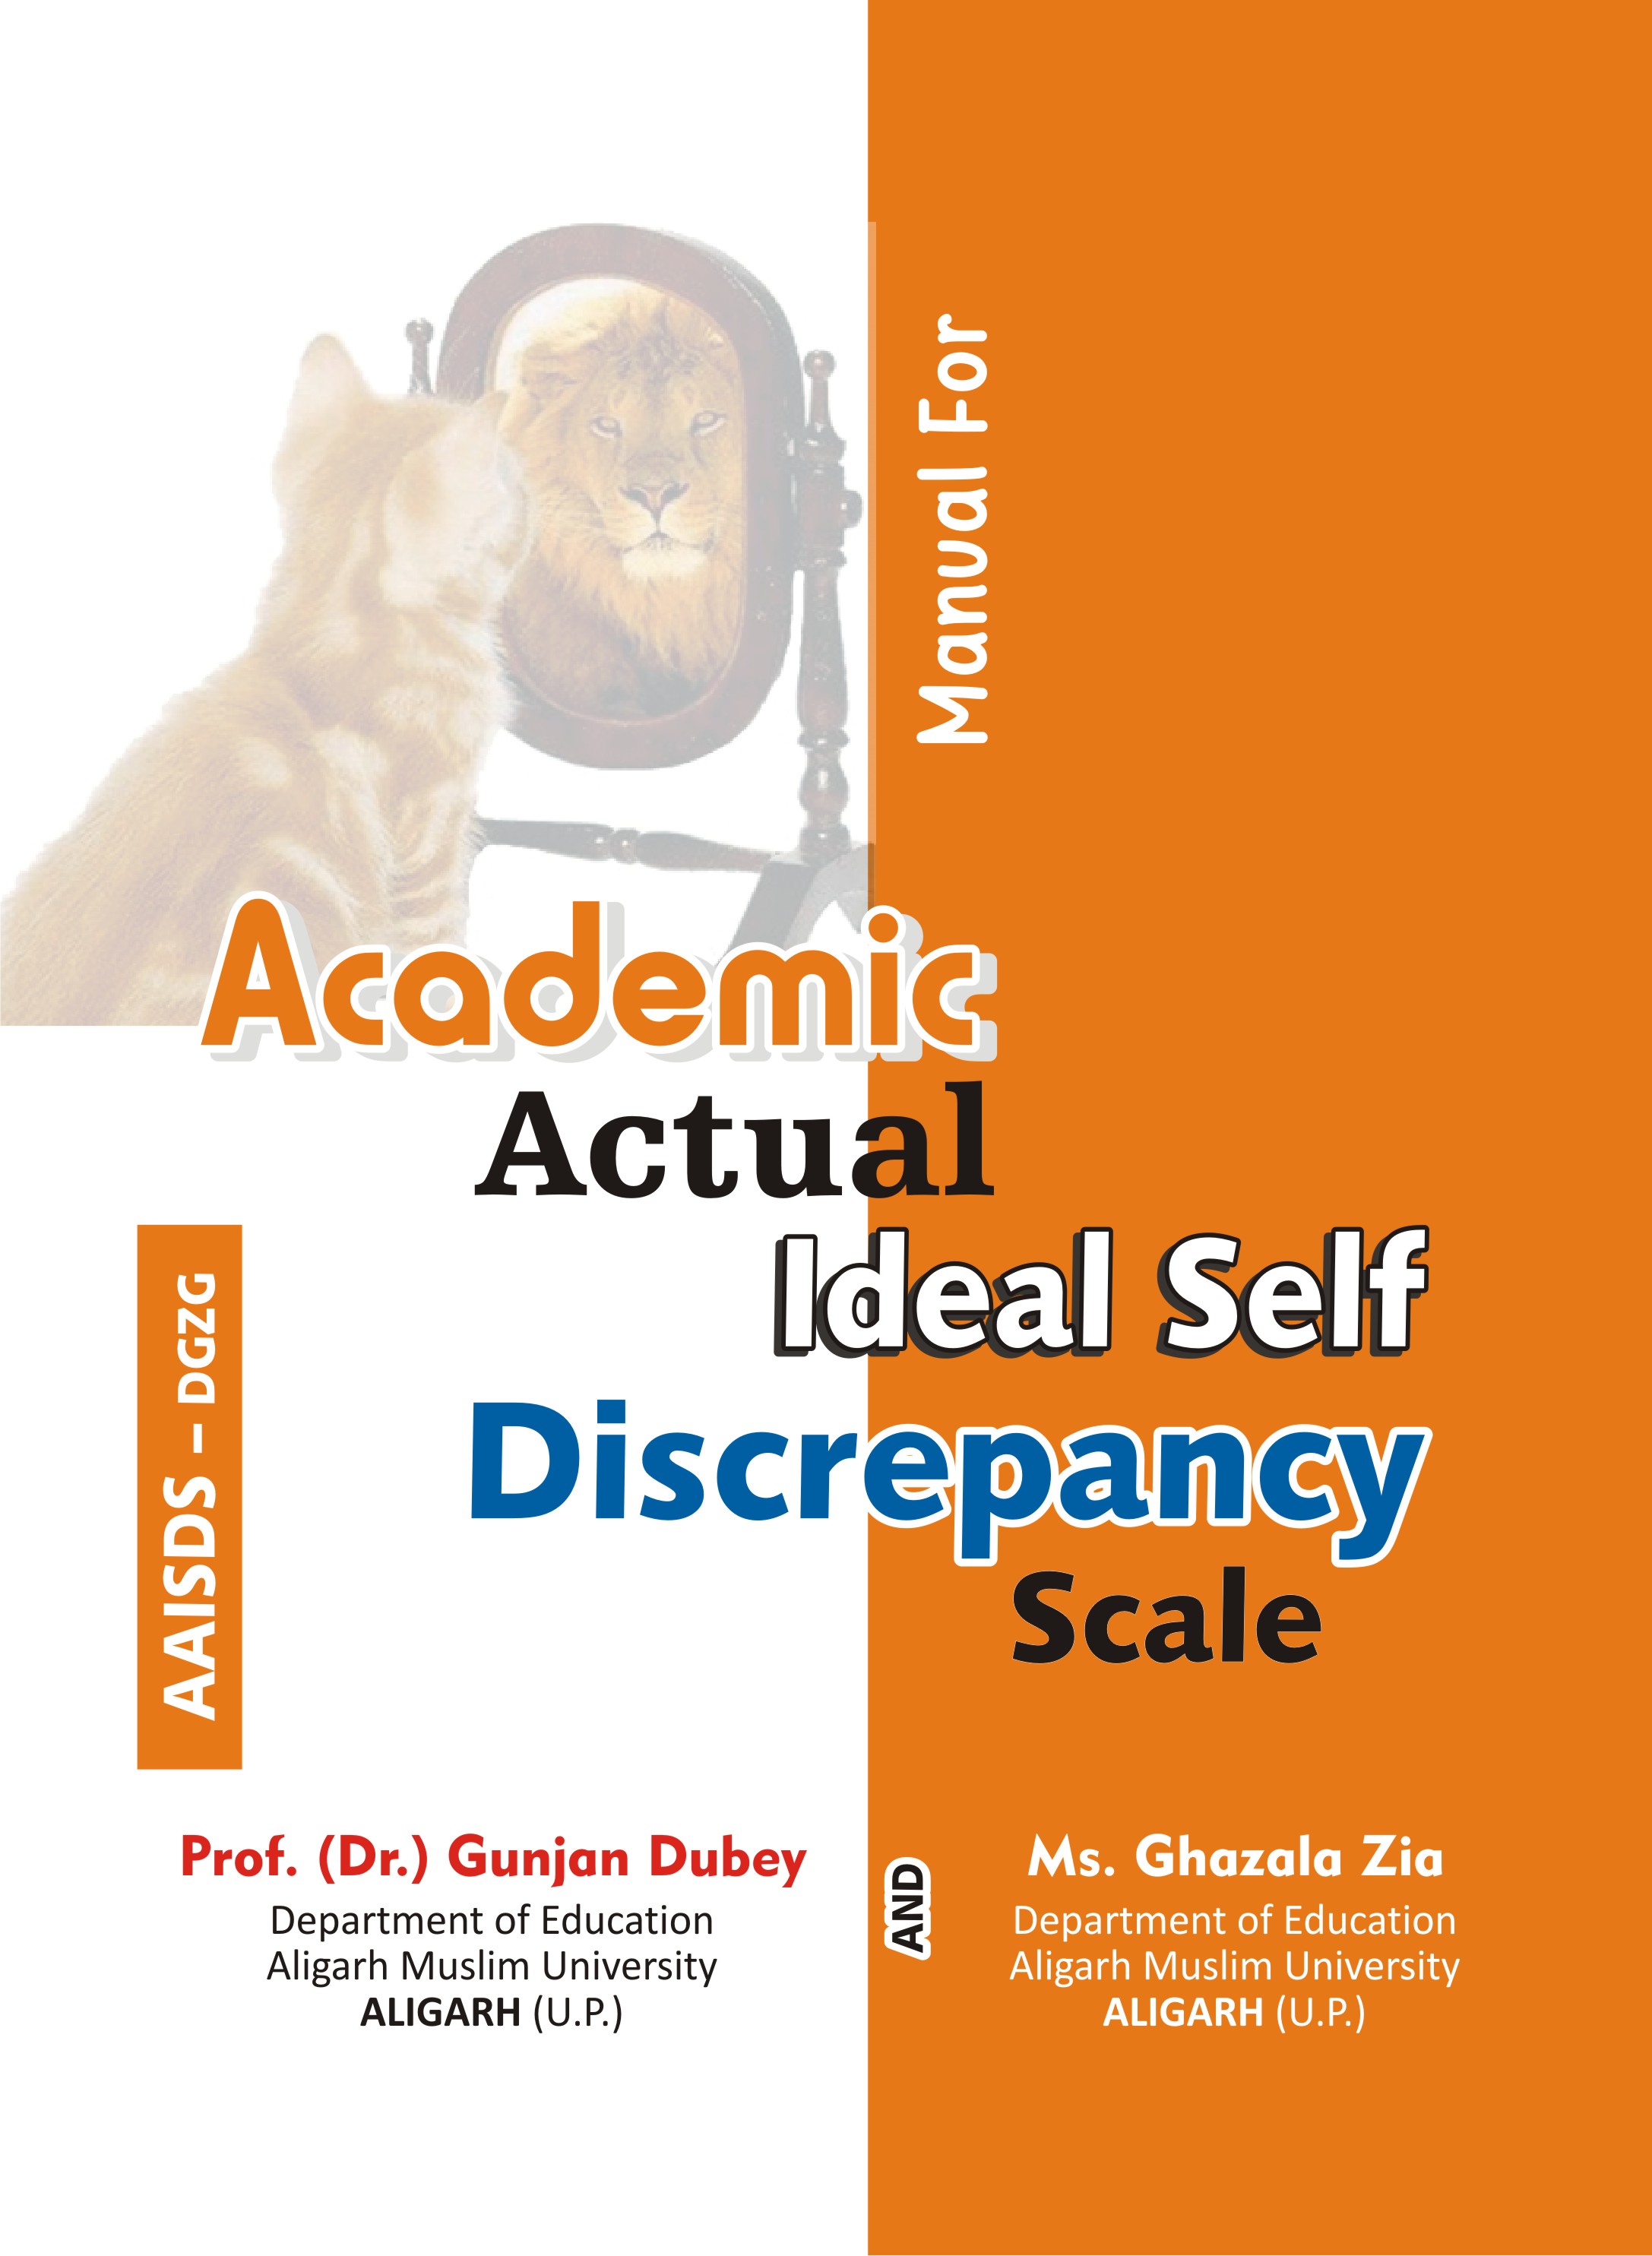 ACADEMIC-ACTUAL-IDEAL-SELF-DISCREPANCY-SCALE